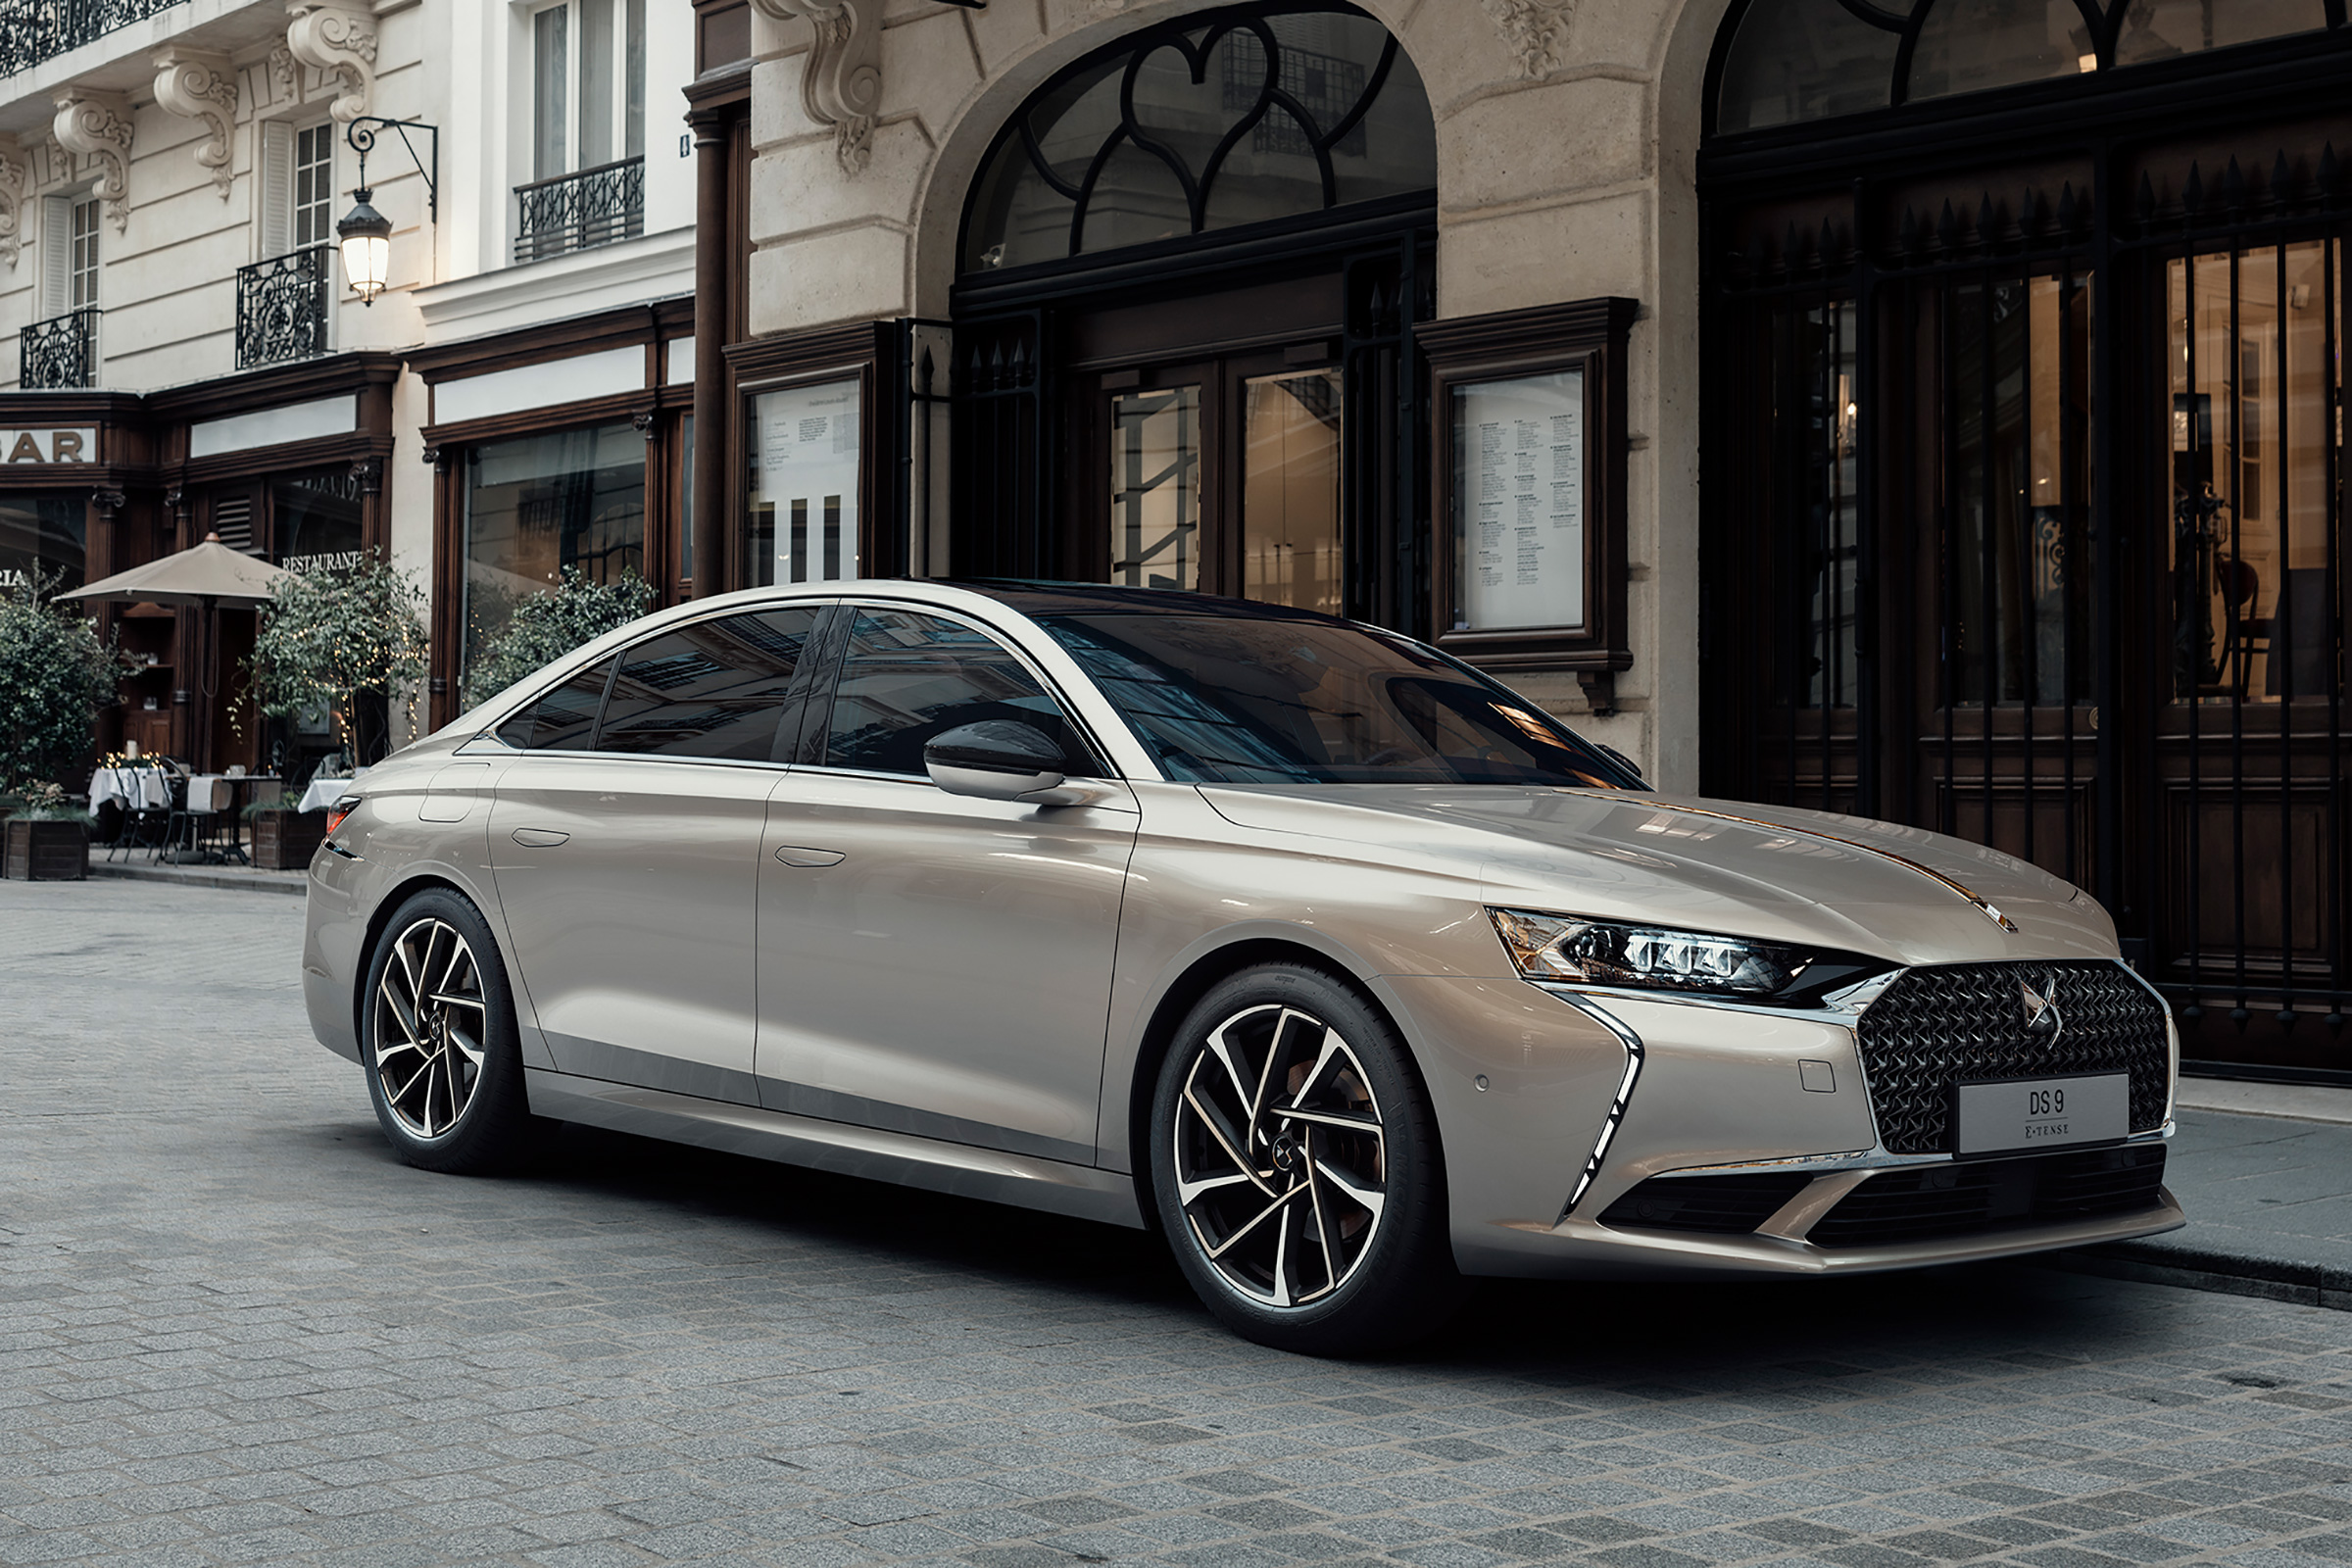 New DS 9 saloon arrives as flagship limo for DS brand | Auto Express